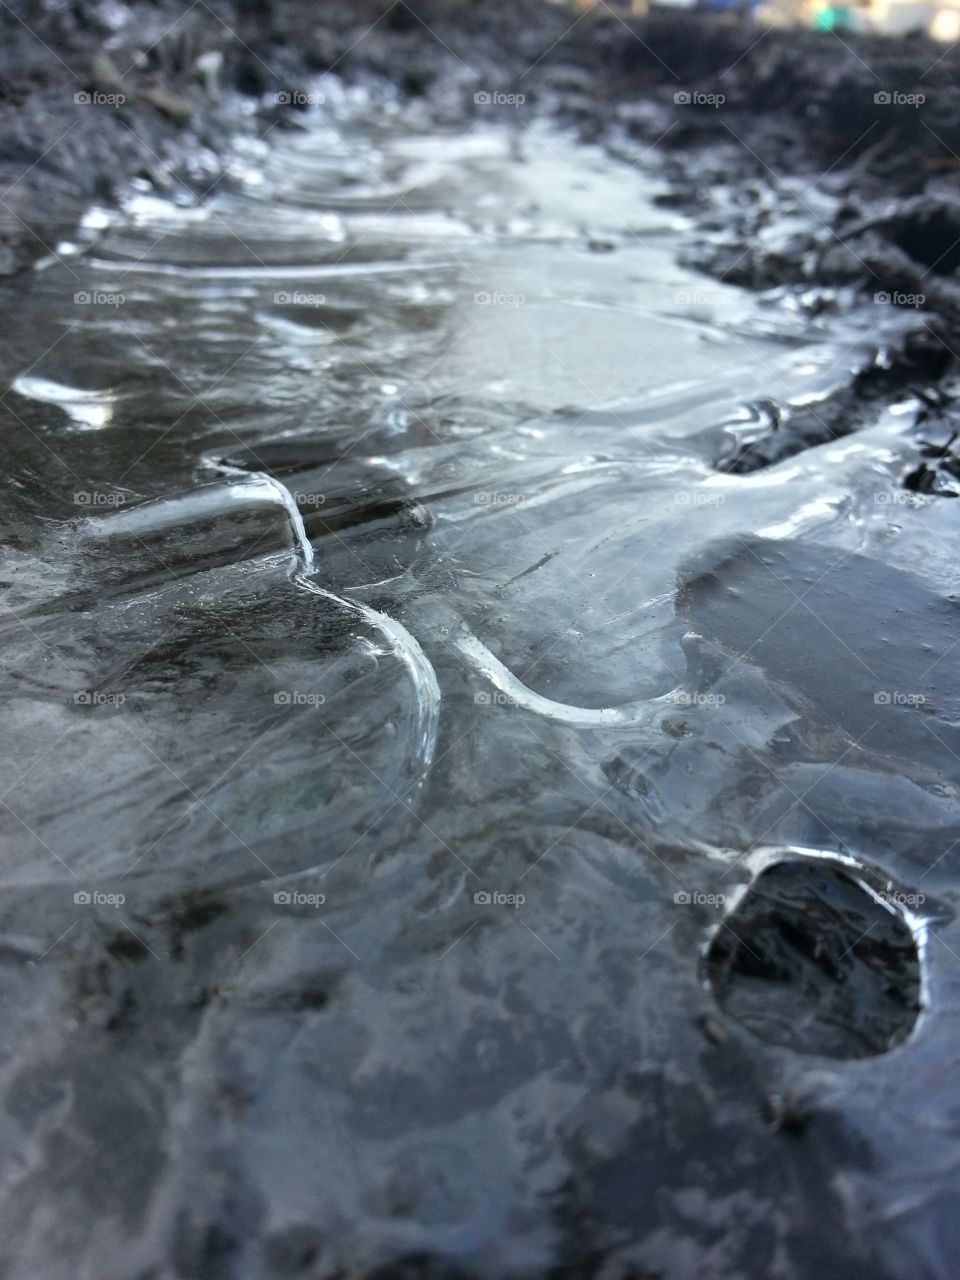 Iced Over . 21 degrees out this morning. Catching the morning light on the ice. 